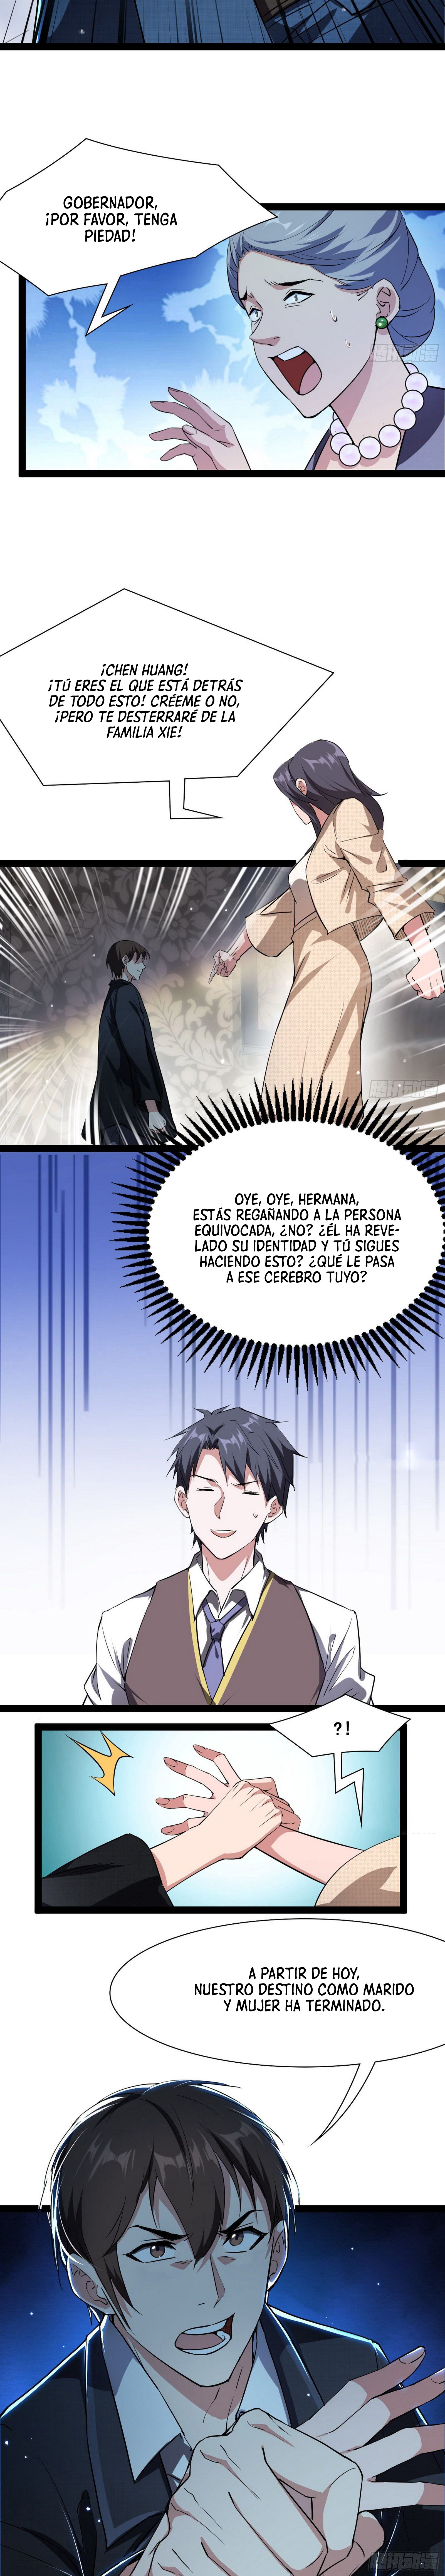 Manga Soy un dios maligno Chapter 94 image number 14